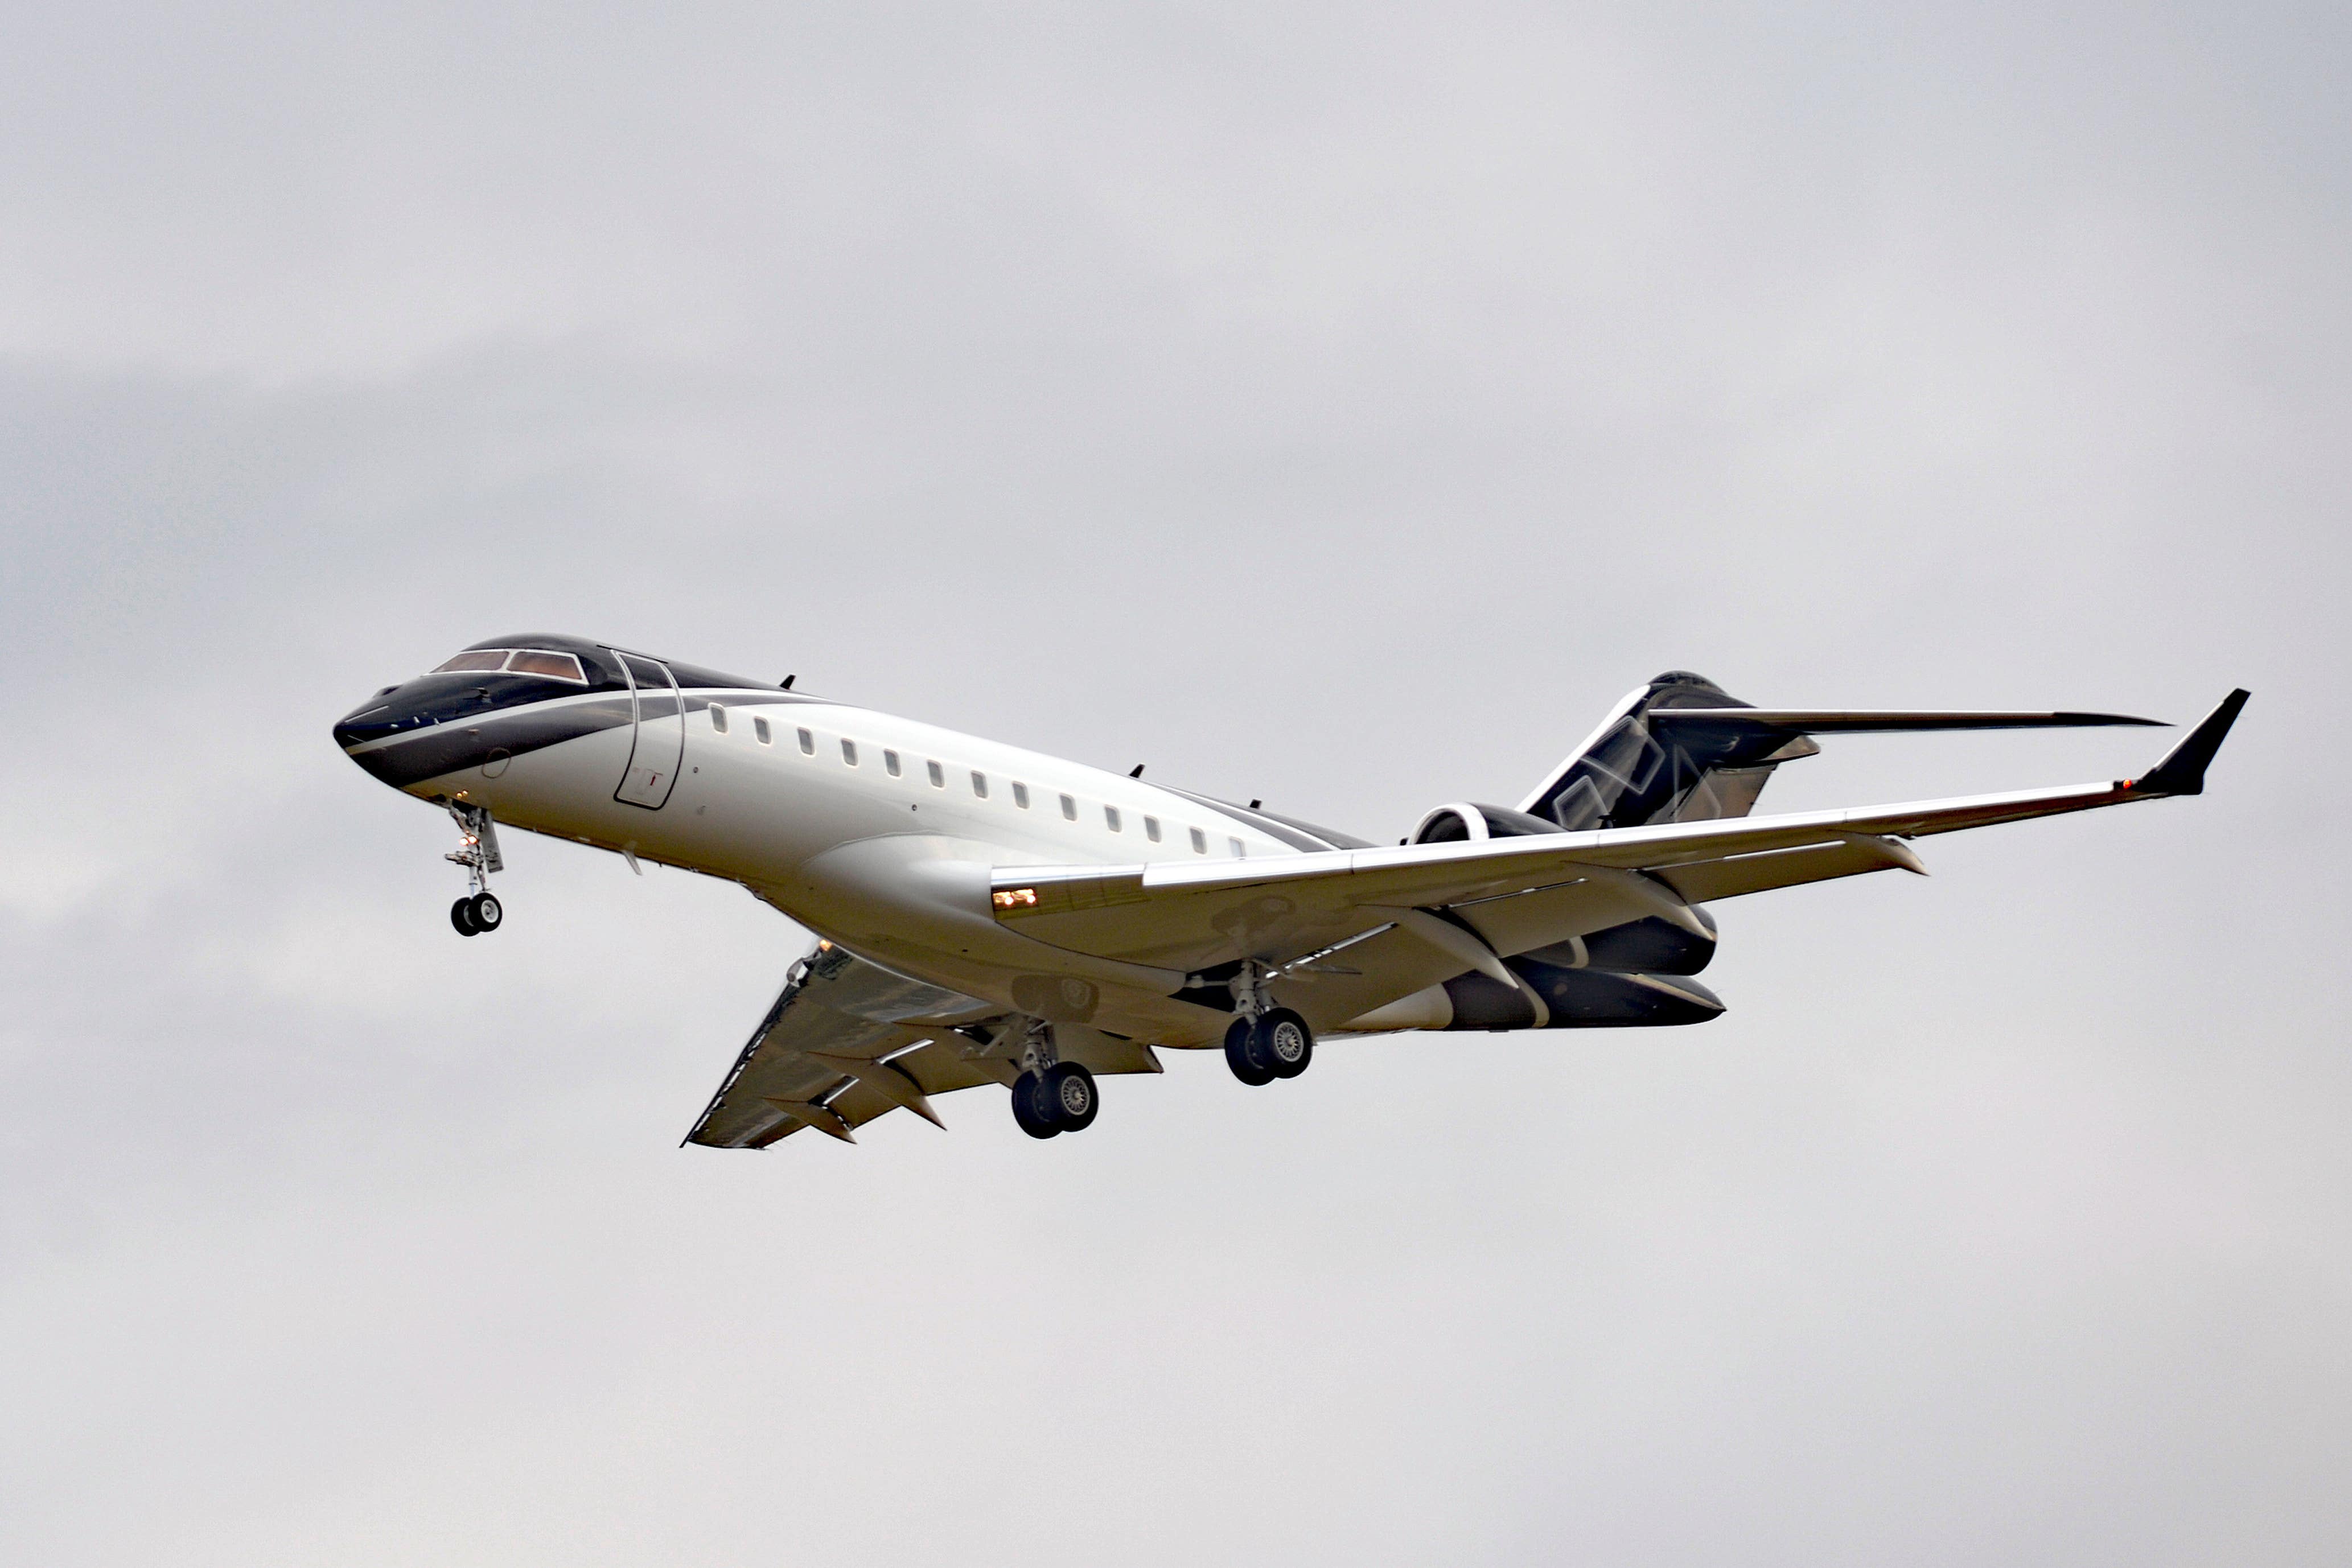 A supertax on private jets should be introduced to fund pubic transport improvements, according to a pressure group (Nick Ansell/PA)